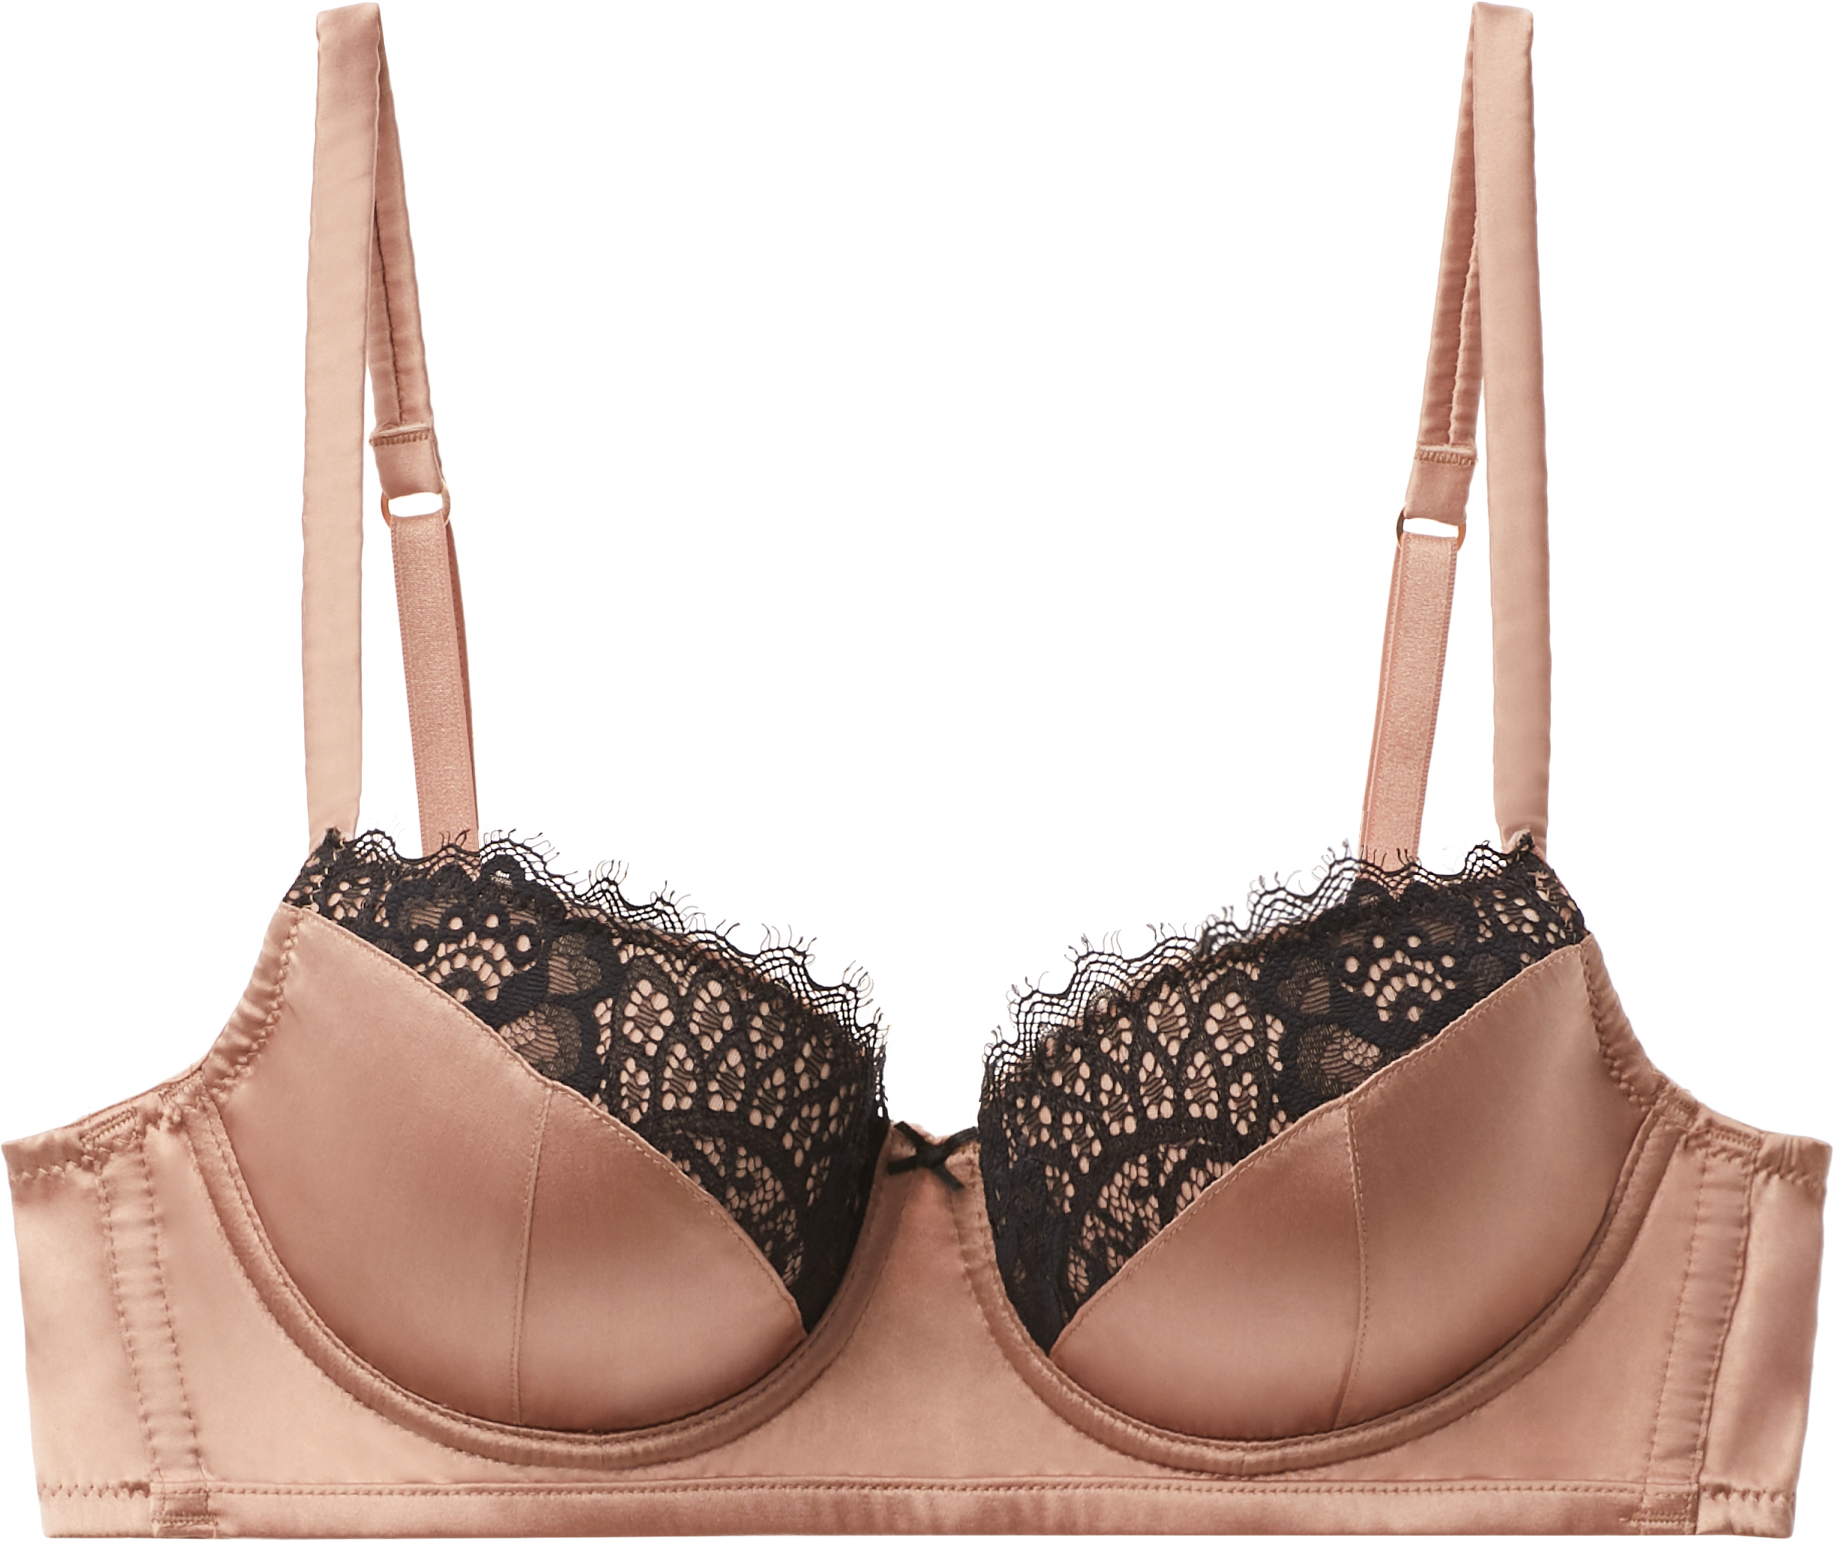 Intimissimi launches Green Collection with Iluna lace